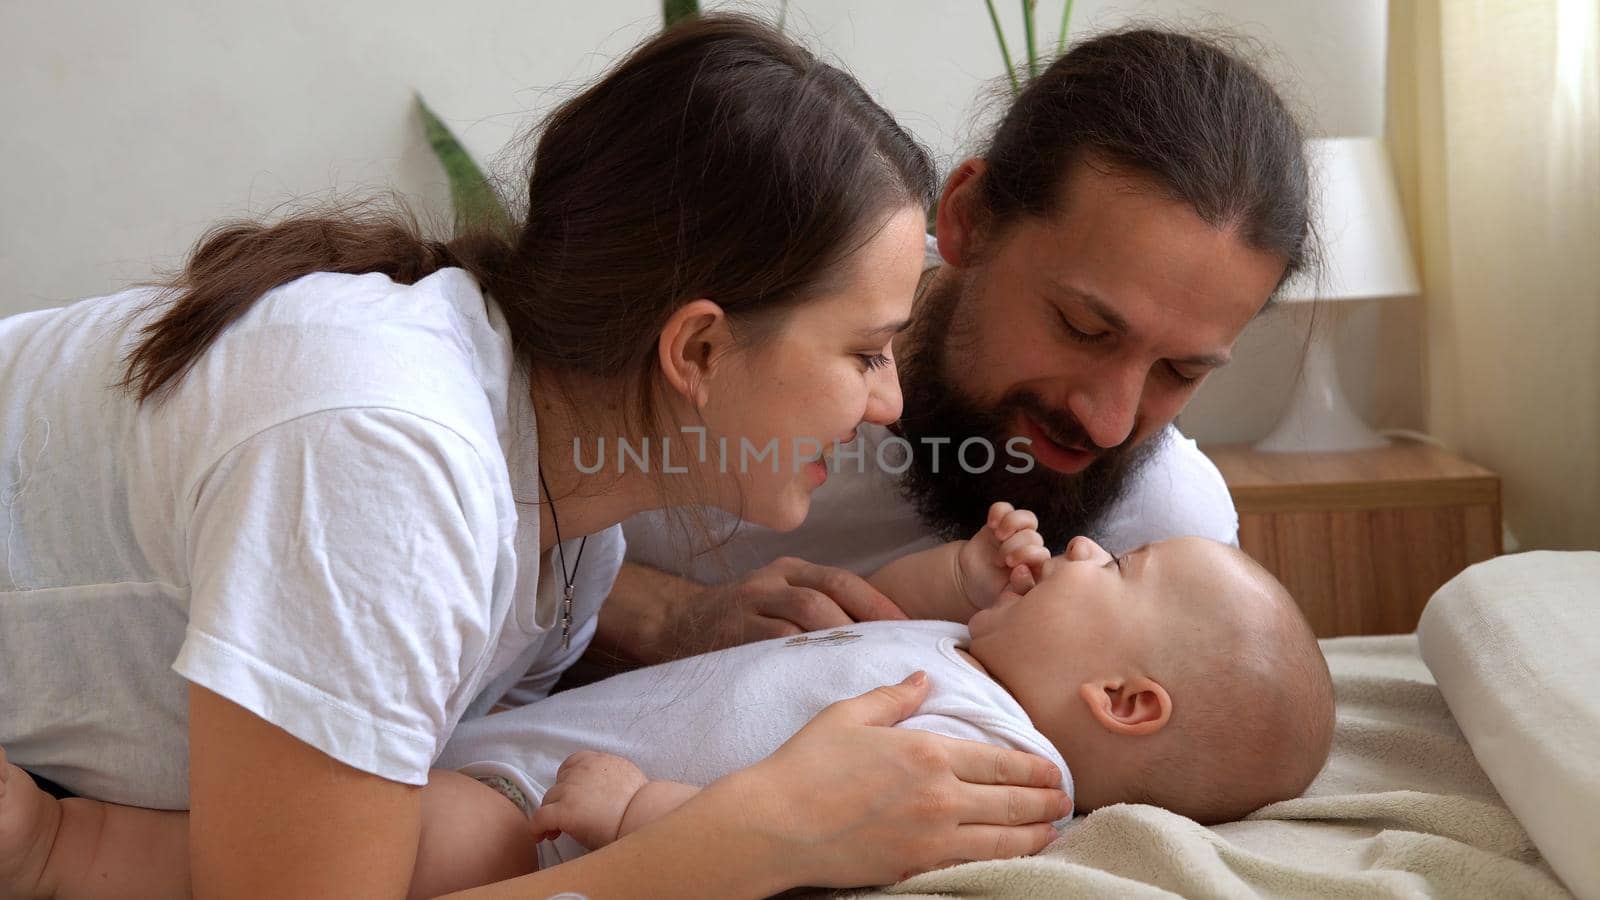 Woman And Man Holding Newborn. Mom, Dad And Baby On Bed. Close-up. Portrait of Young Smiling Family With Newborn On Hands. Happy Marriage Couple On Background. Childhood, Parenthood, Infants Concept by mytrykau